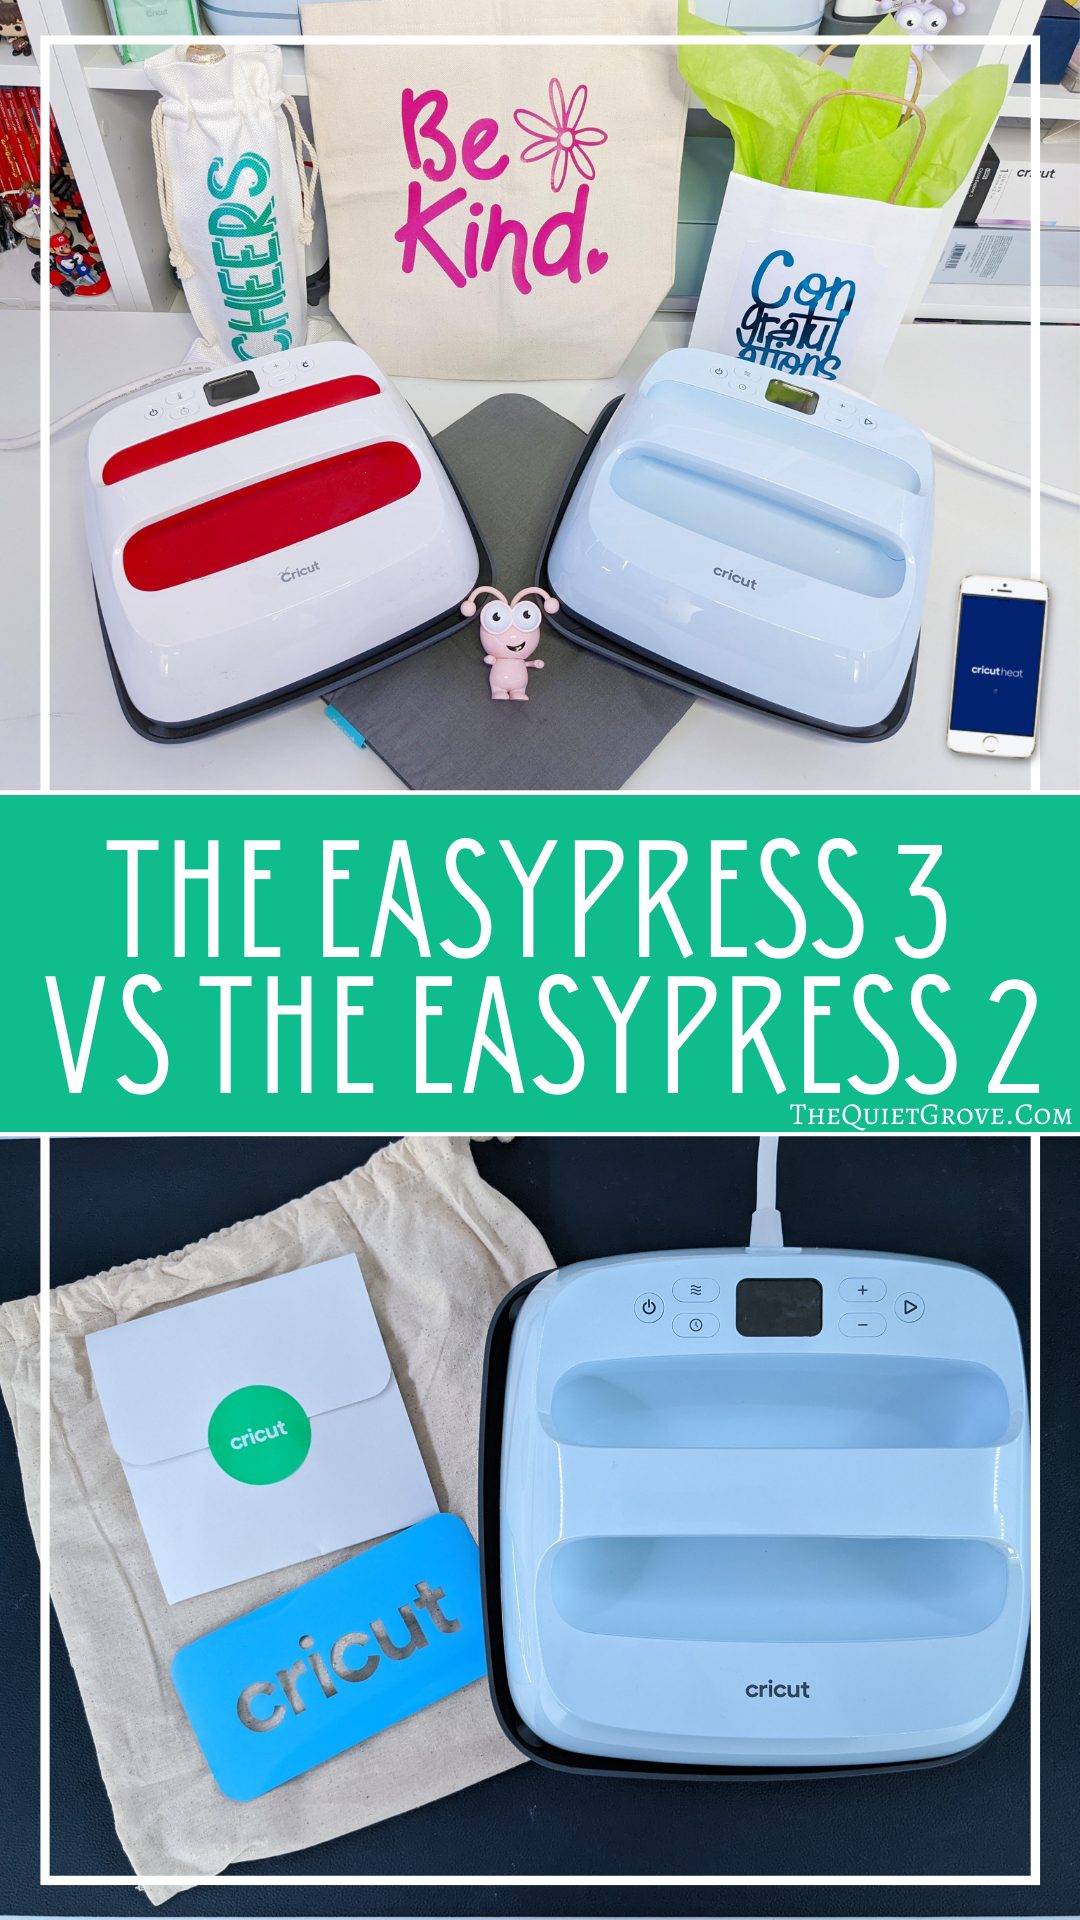 The EasyPress 3 vs The EasyPress 2 ⋆ The Quiet Grove